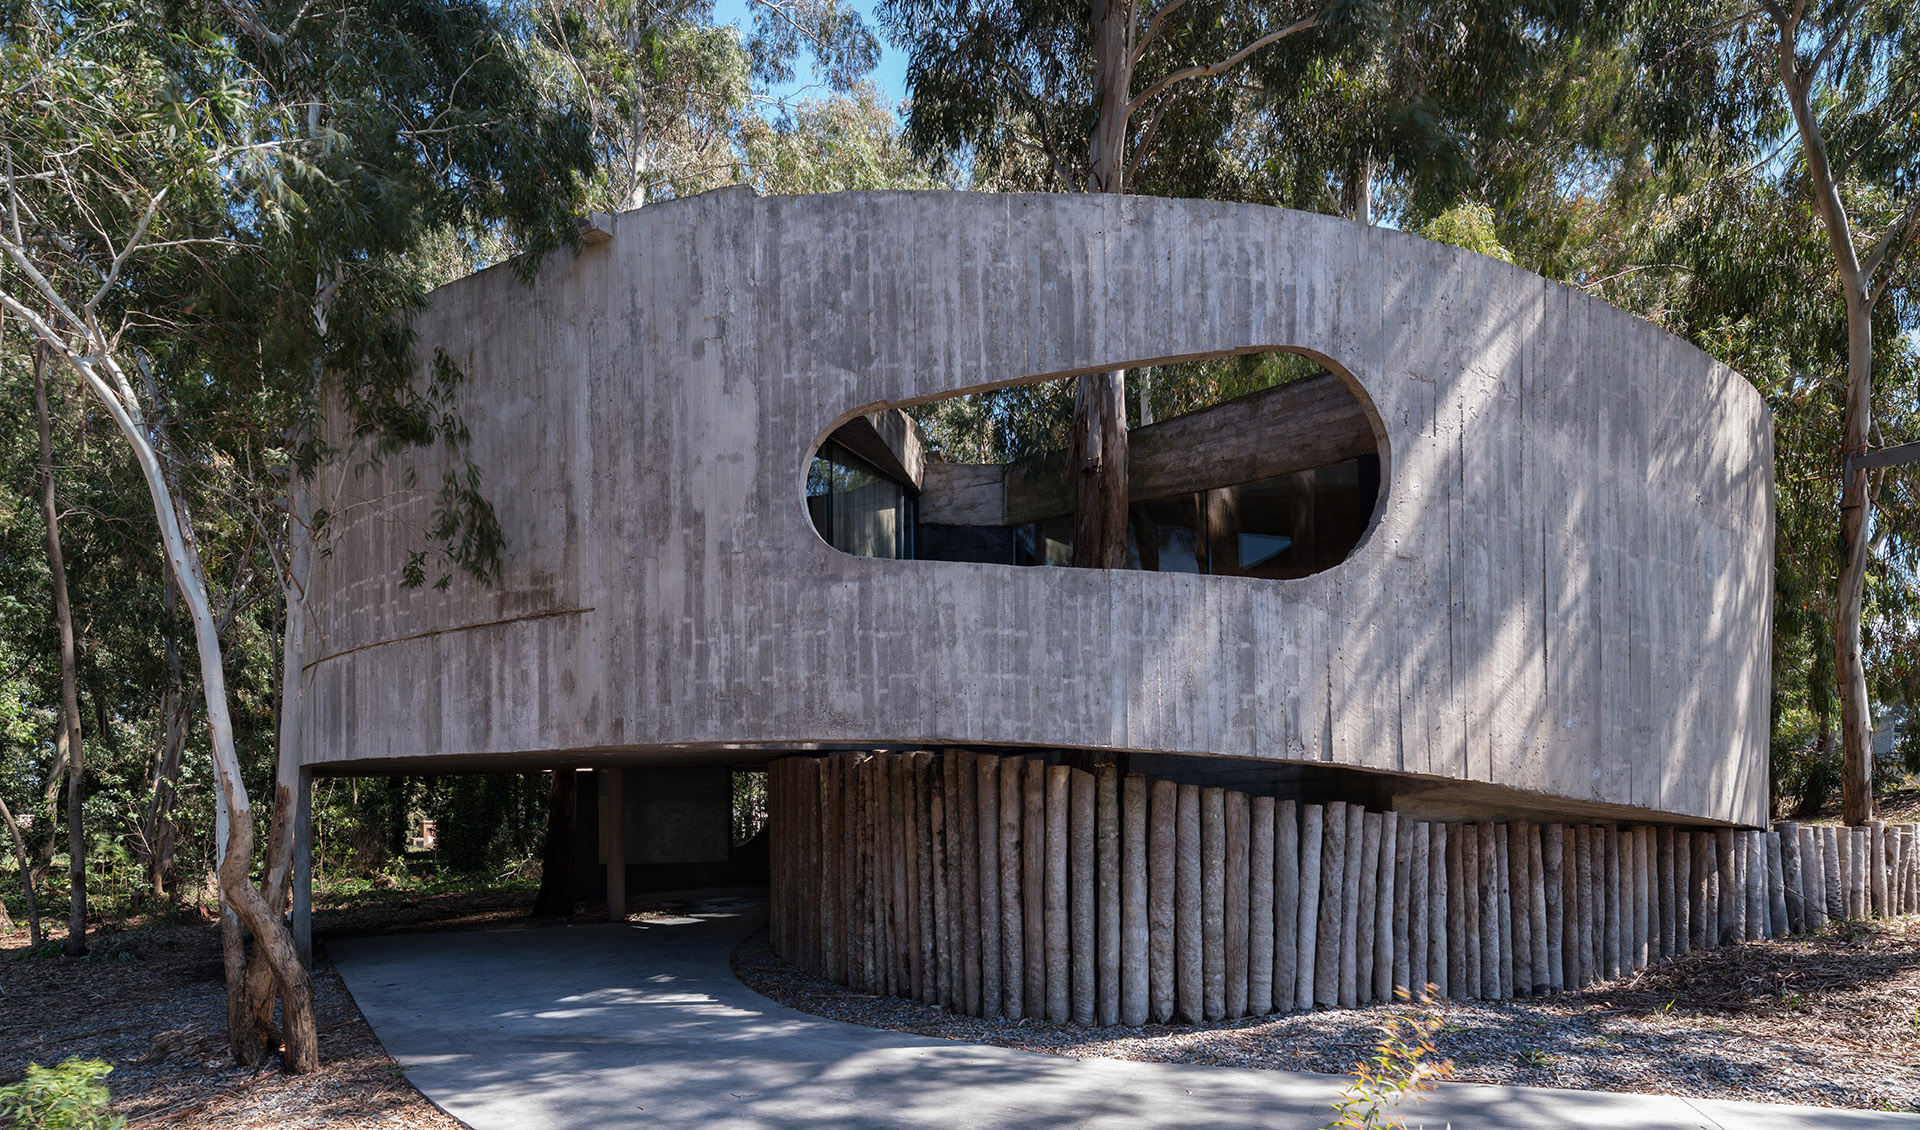 Concrete shell in a eucalyptus forest. A multiplicity of paths and spatial relations